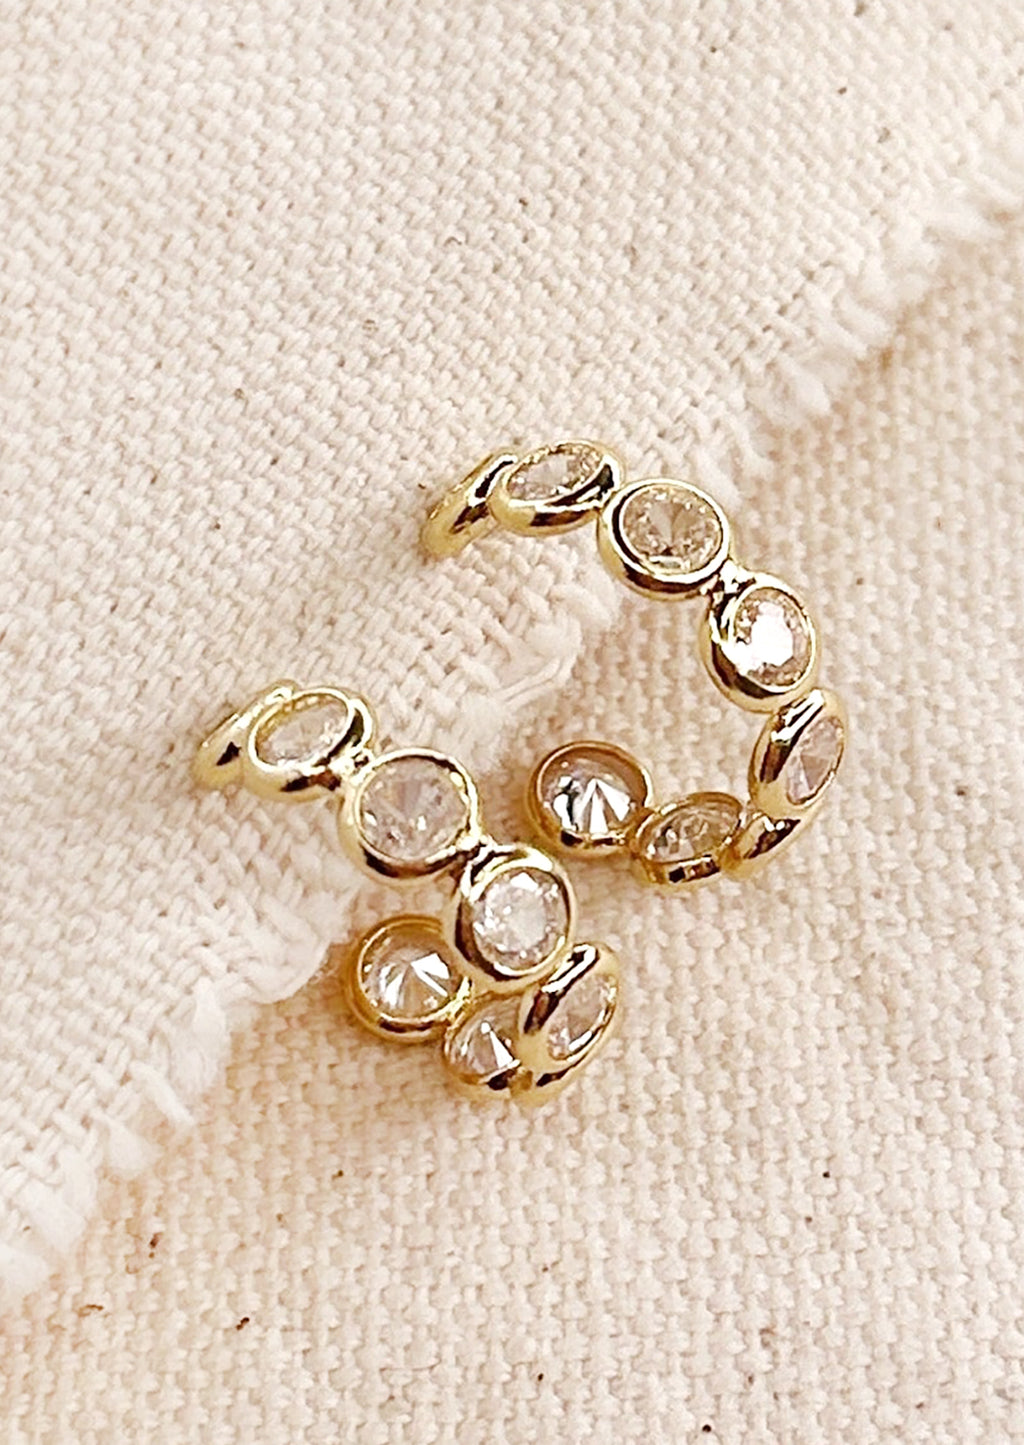 1: A pair of gold hoop earrings with clear bezeled circles.